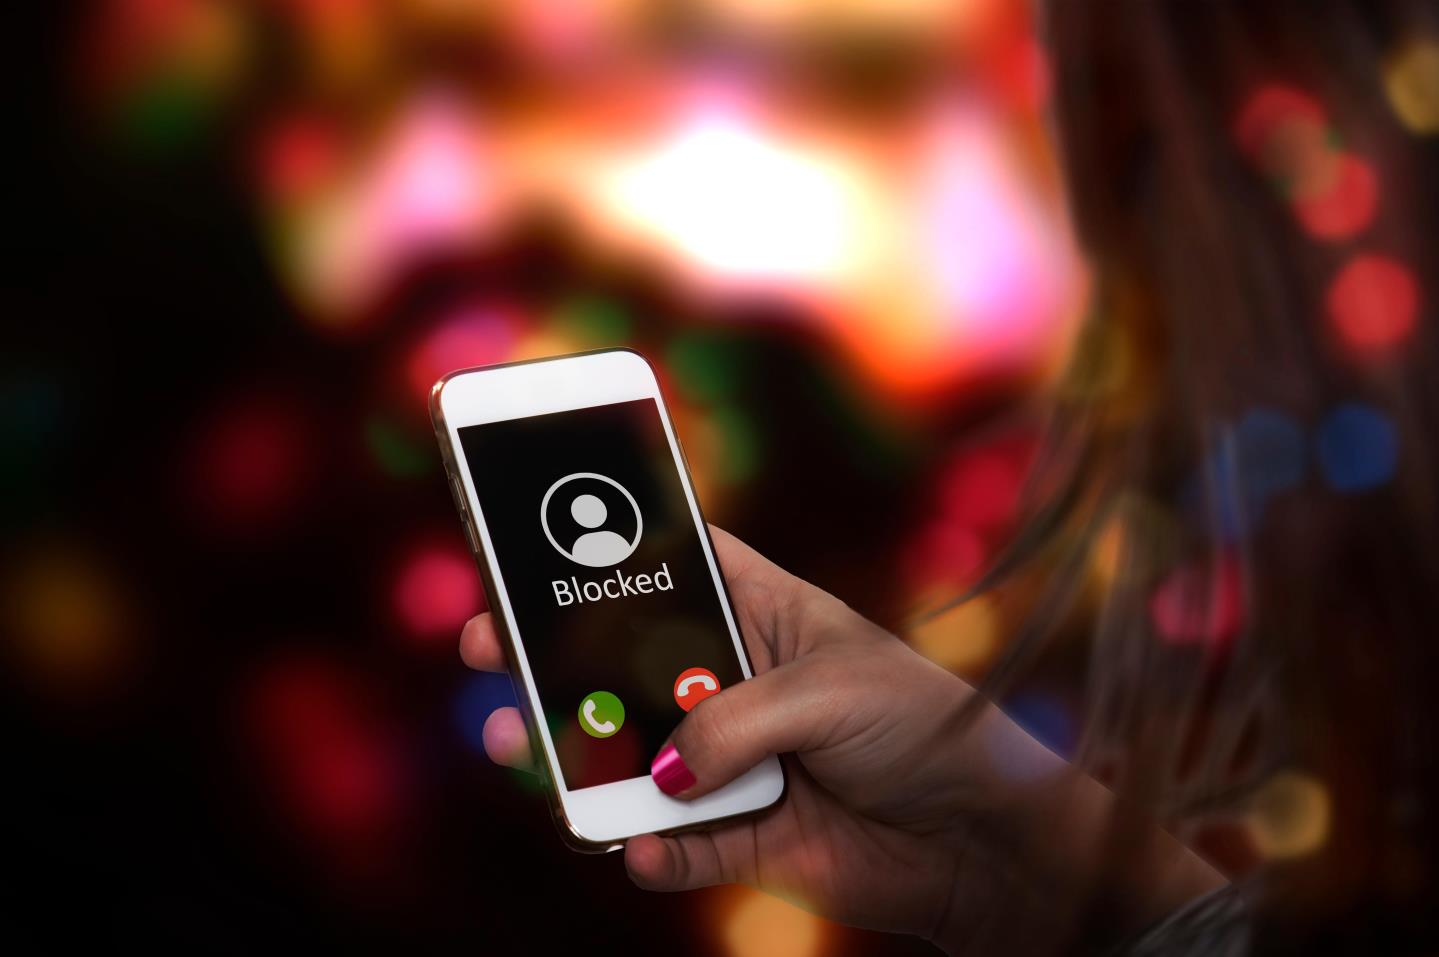 A woman holding a phone with the word 'blocked' on the screen